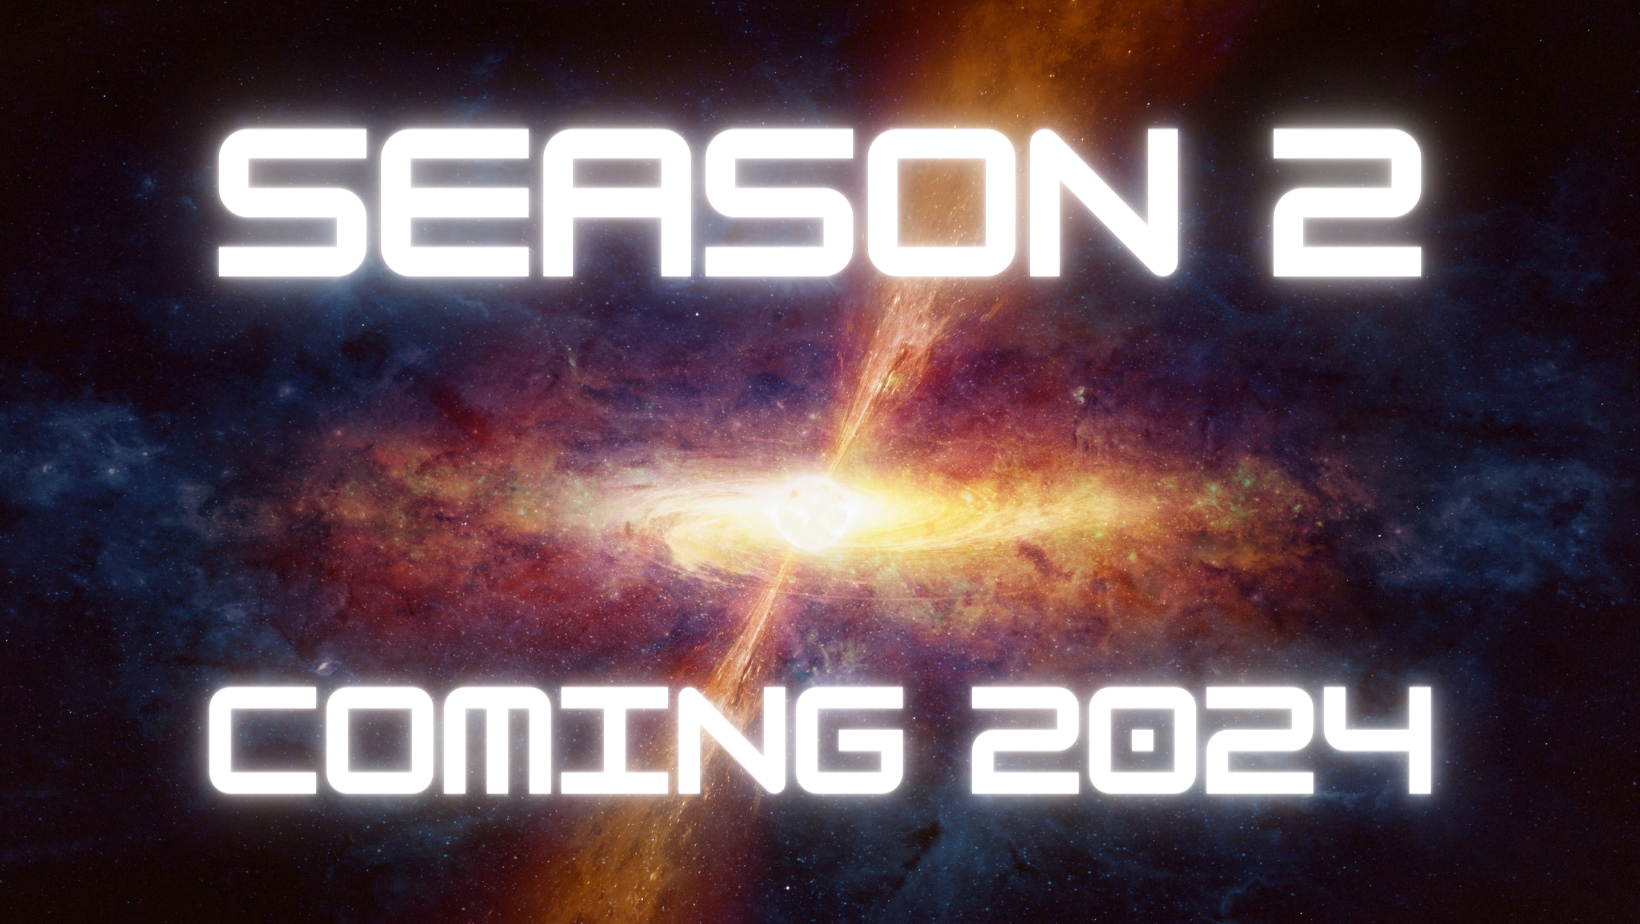 A brilliantly colored quasar in the distance of space behind the words "Season 2 - Coming 2024" which indicate that season 2 of the Ardent Redux Saga, an exciting space opera adventure by science fiction author J. L. Stowers is expected to release in 2024. 